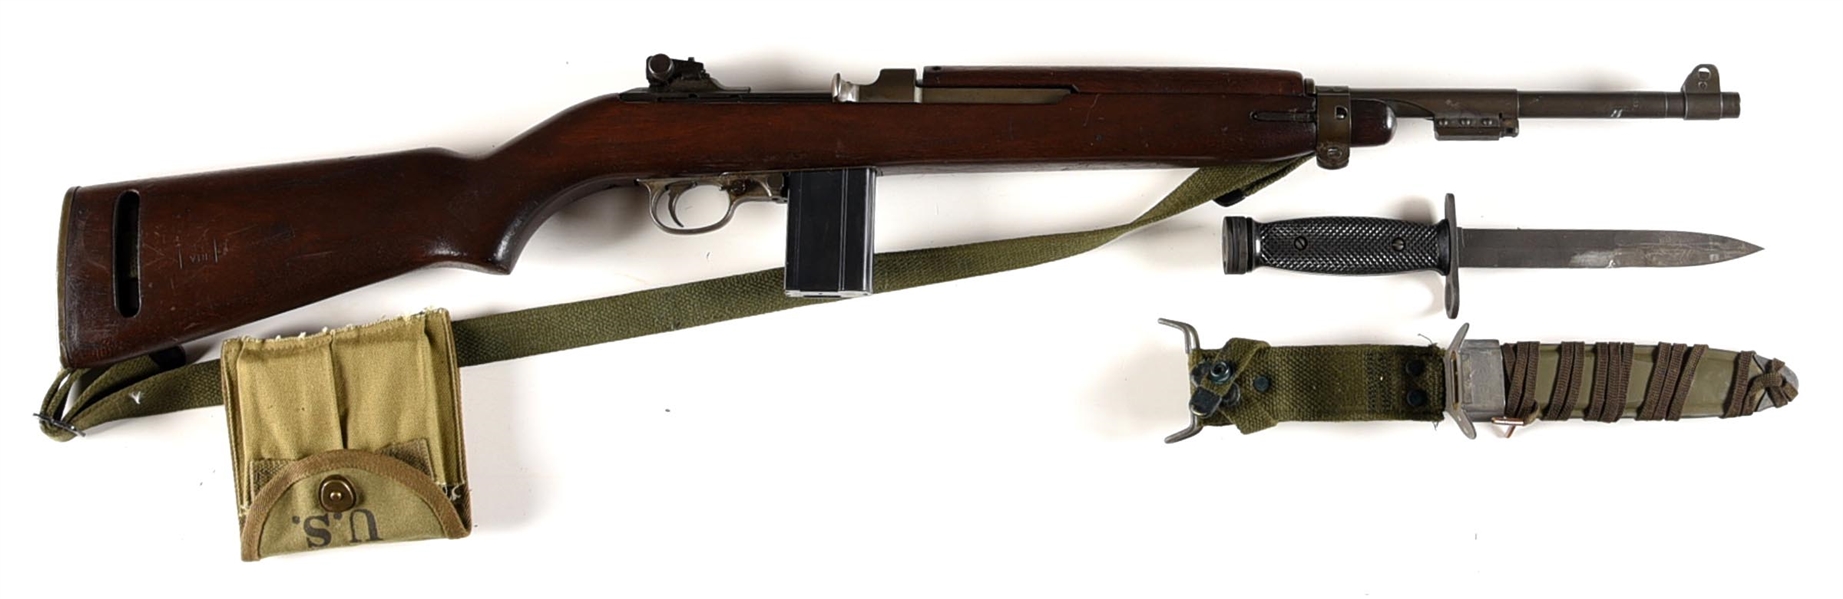 (C) INLAND M1 CARBINE WITH ACCESSORIES.